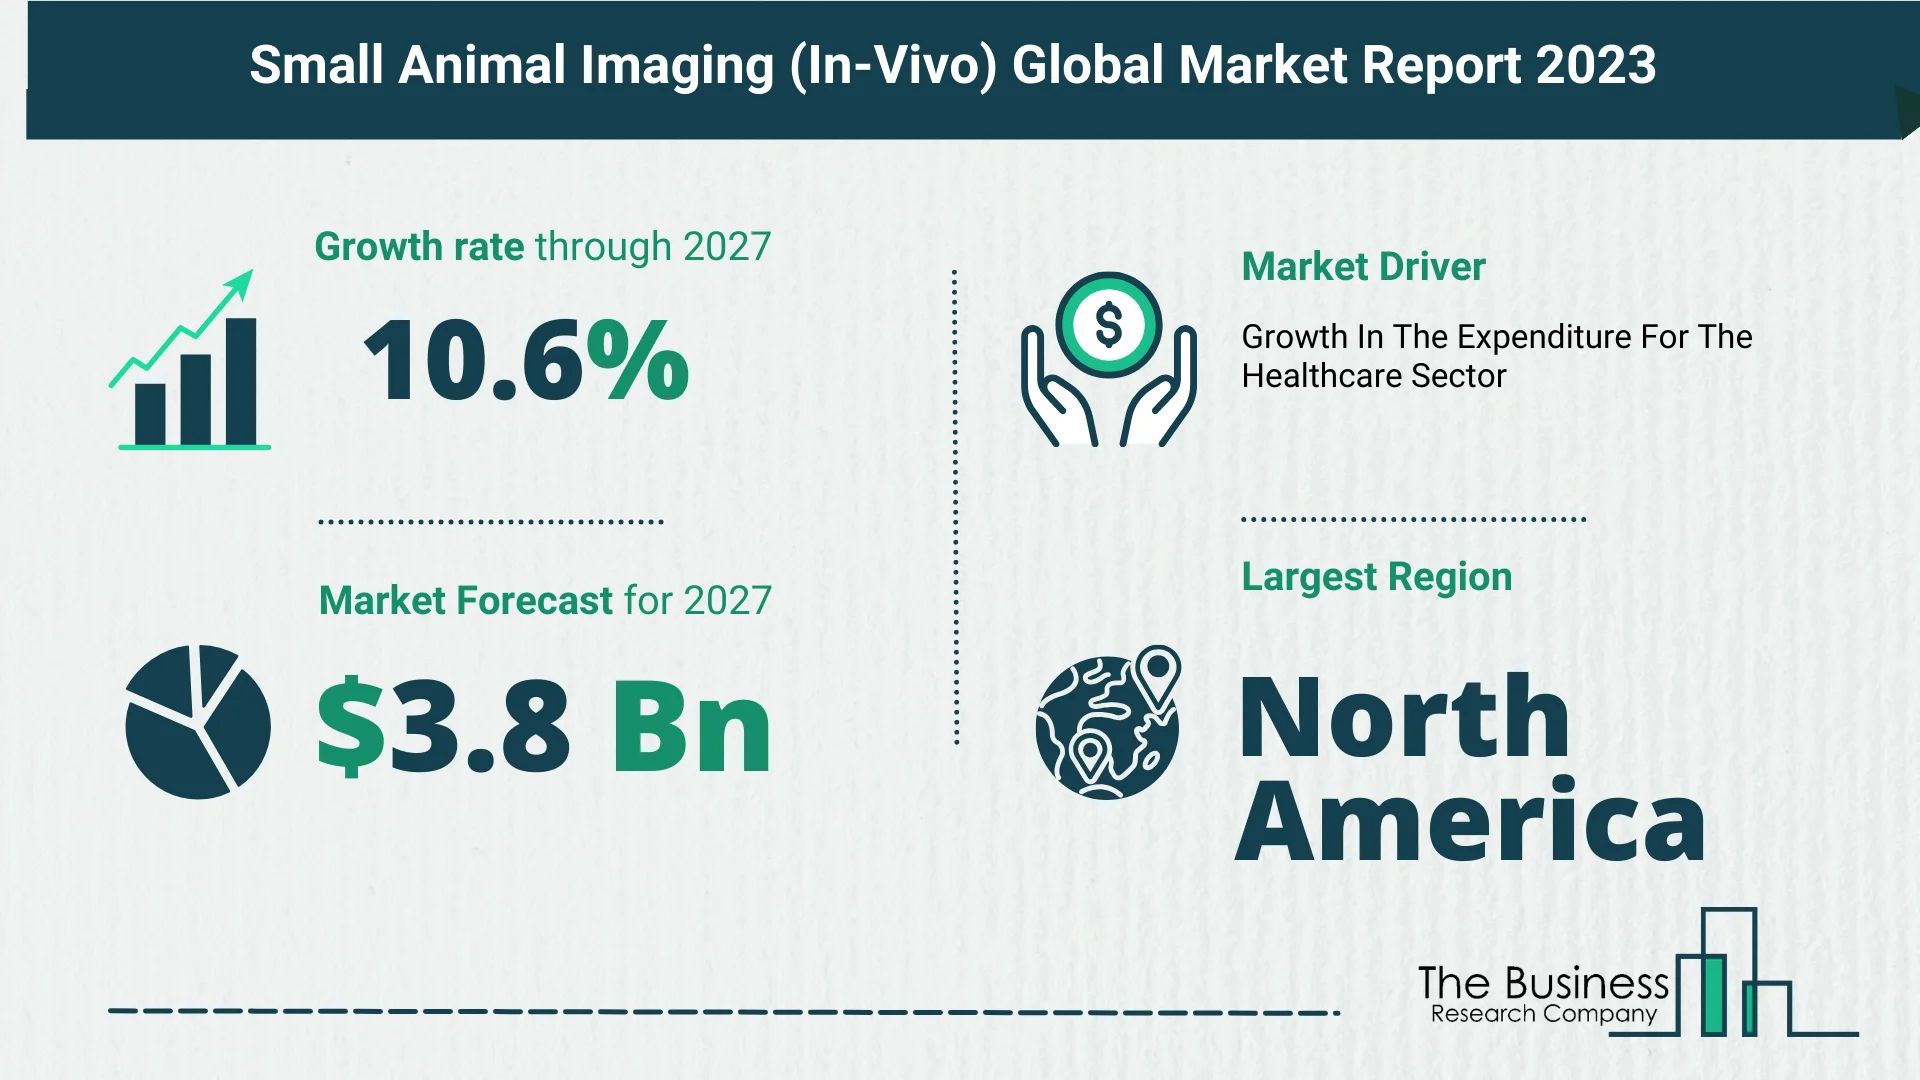 Key Trends And Drivers In The Small Animal Imaging (In-Vivo) Market 2023